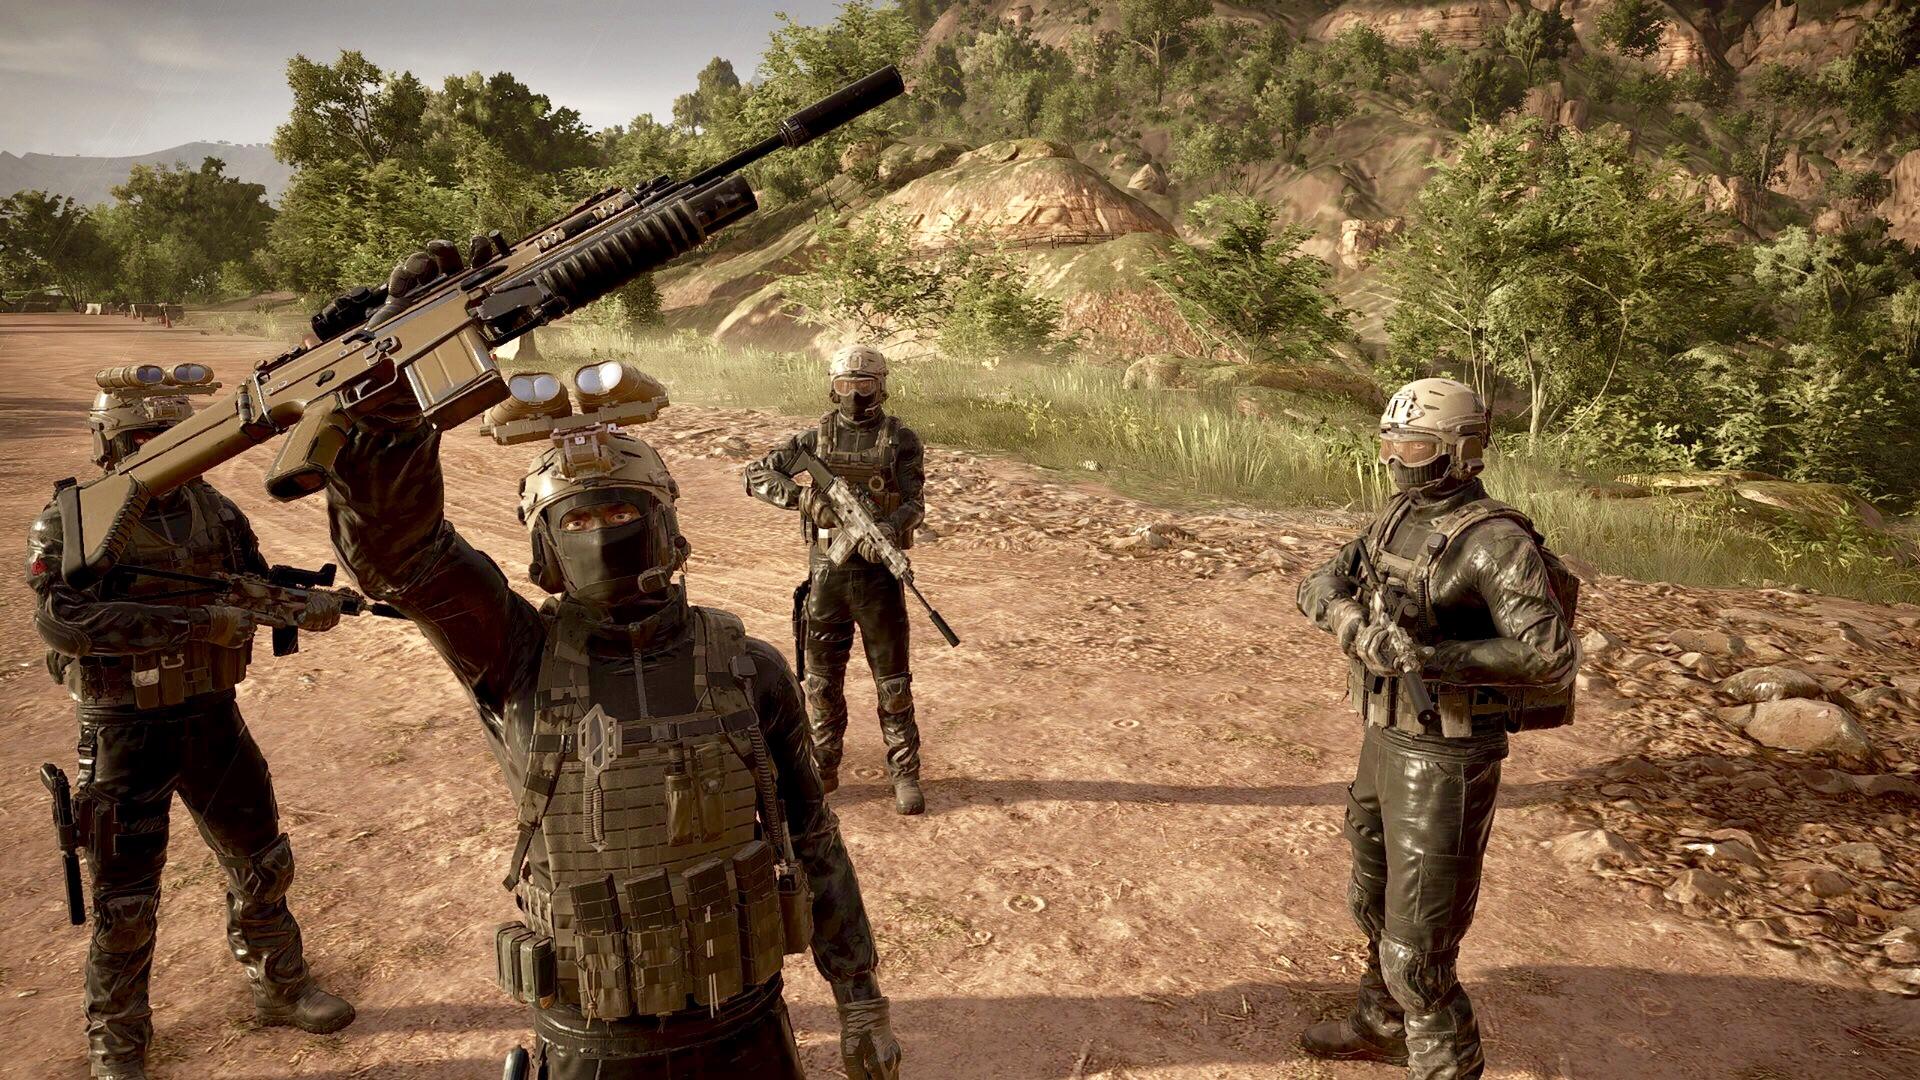 Shadow Company (MW2) are boots on the ground in Bolivia